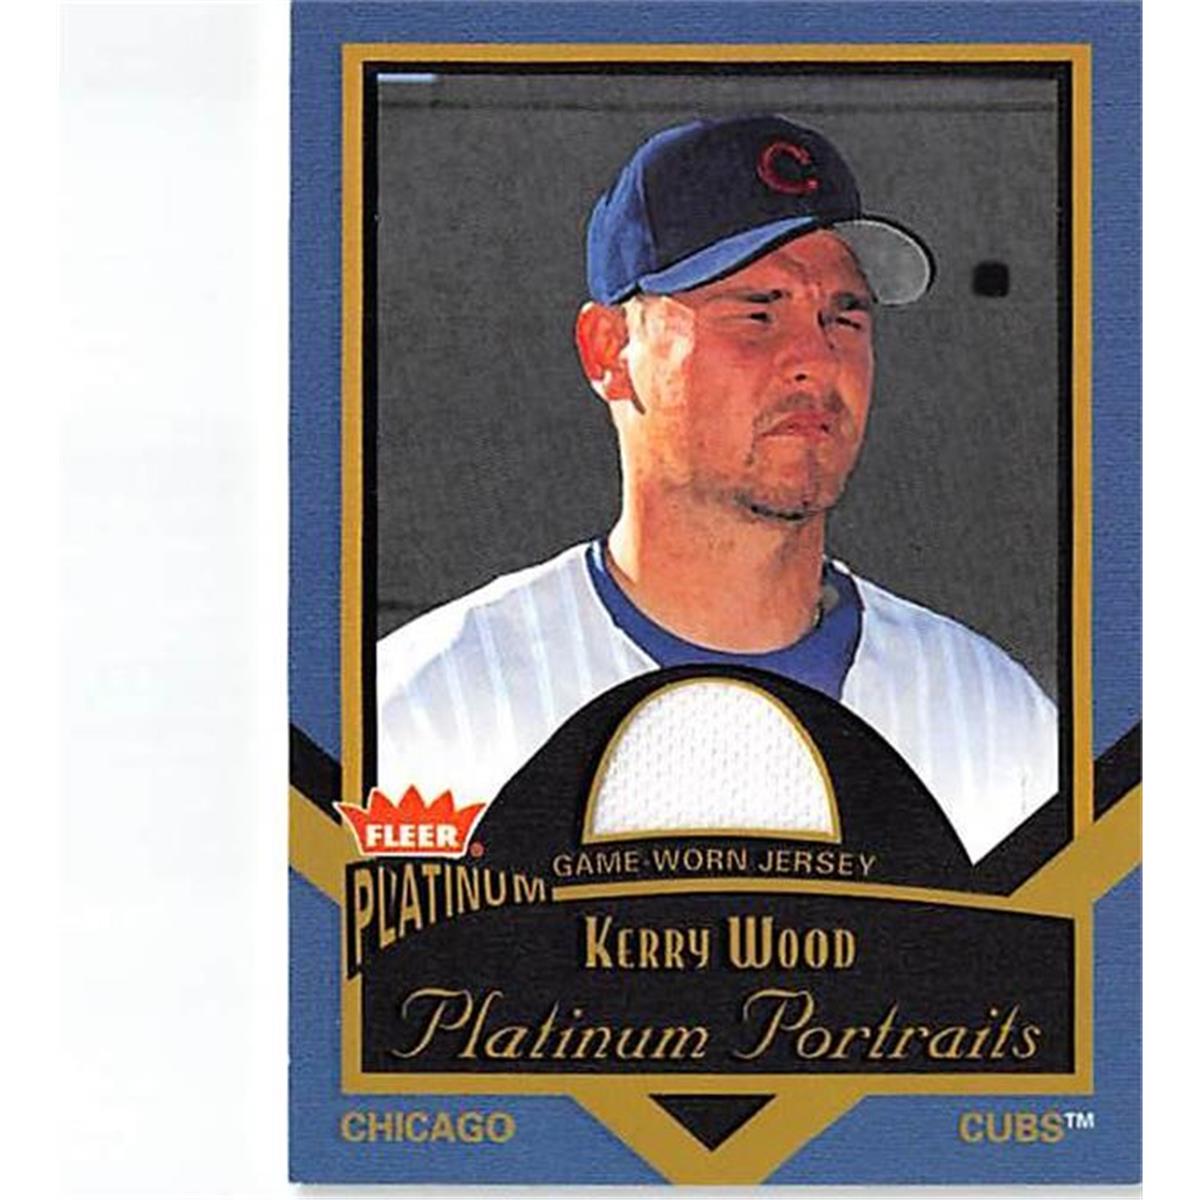 Picture of Autograph Warehouse 398777 Kerry Wood Player Worn Jersey Piece Baseball Card - 2001 Fleer Platinum-PPKW